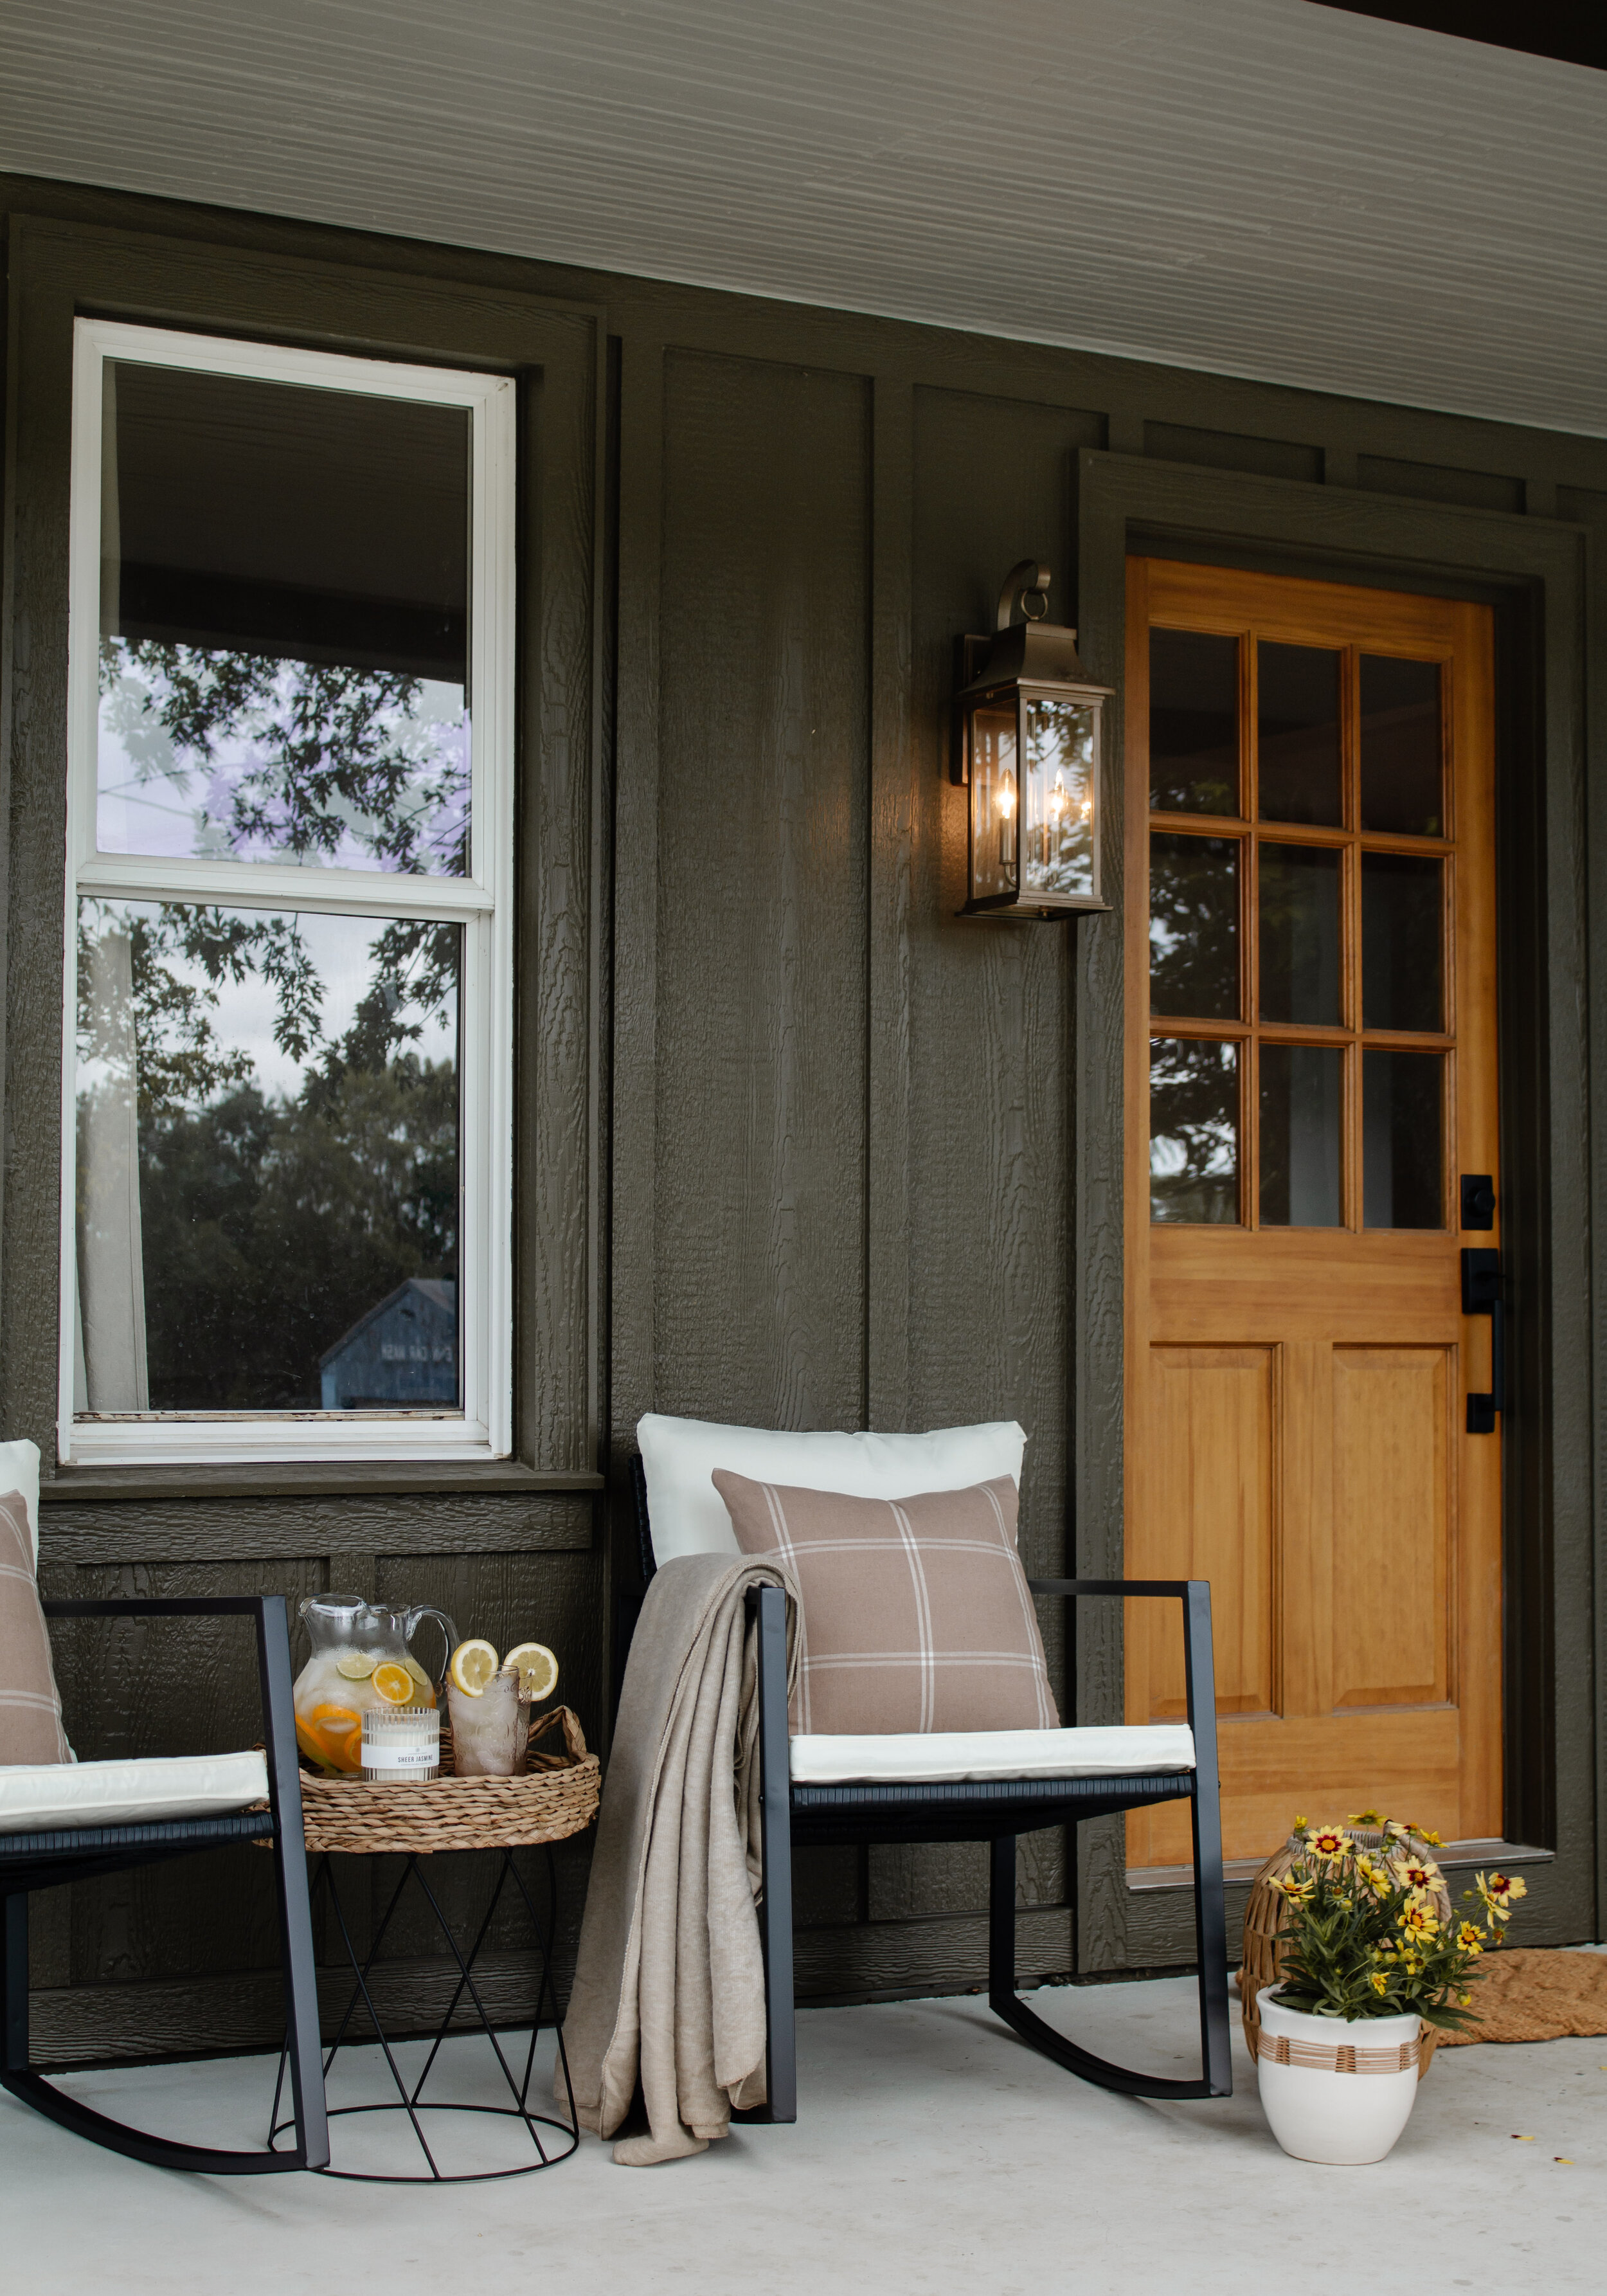 Updating our porch for summer with new seating and decor. Outdoor porch styling tips by Nadine Stay. Walmart home finds. | Nadine Stay